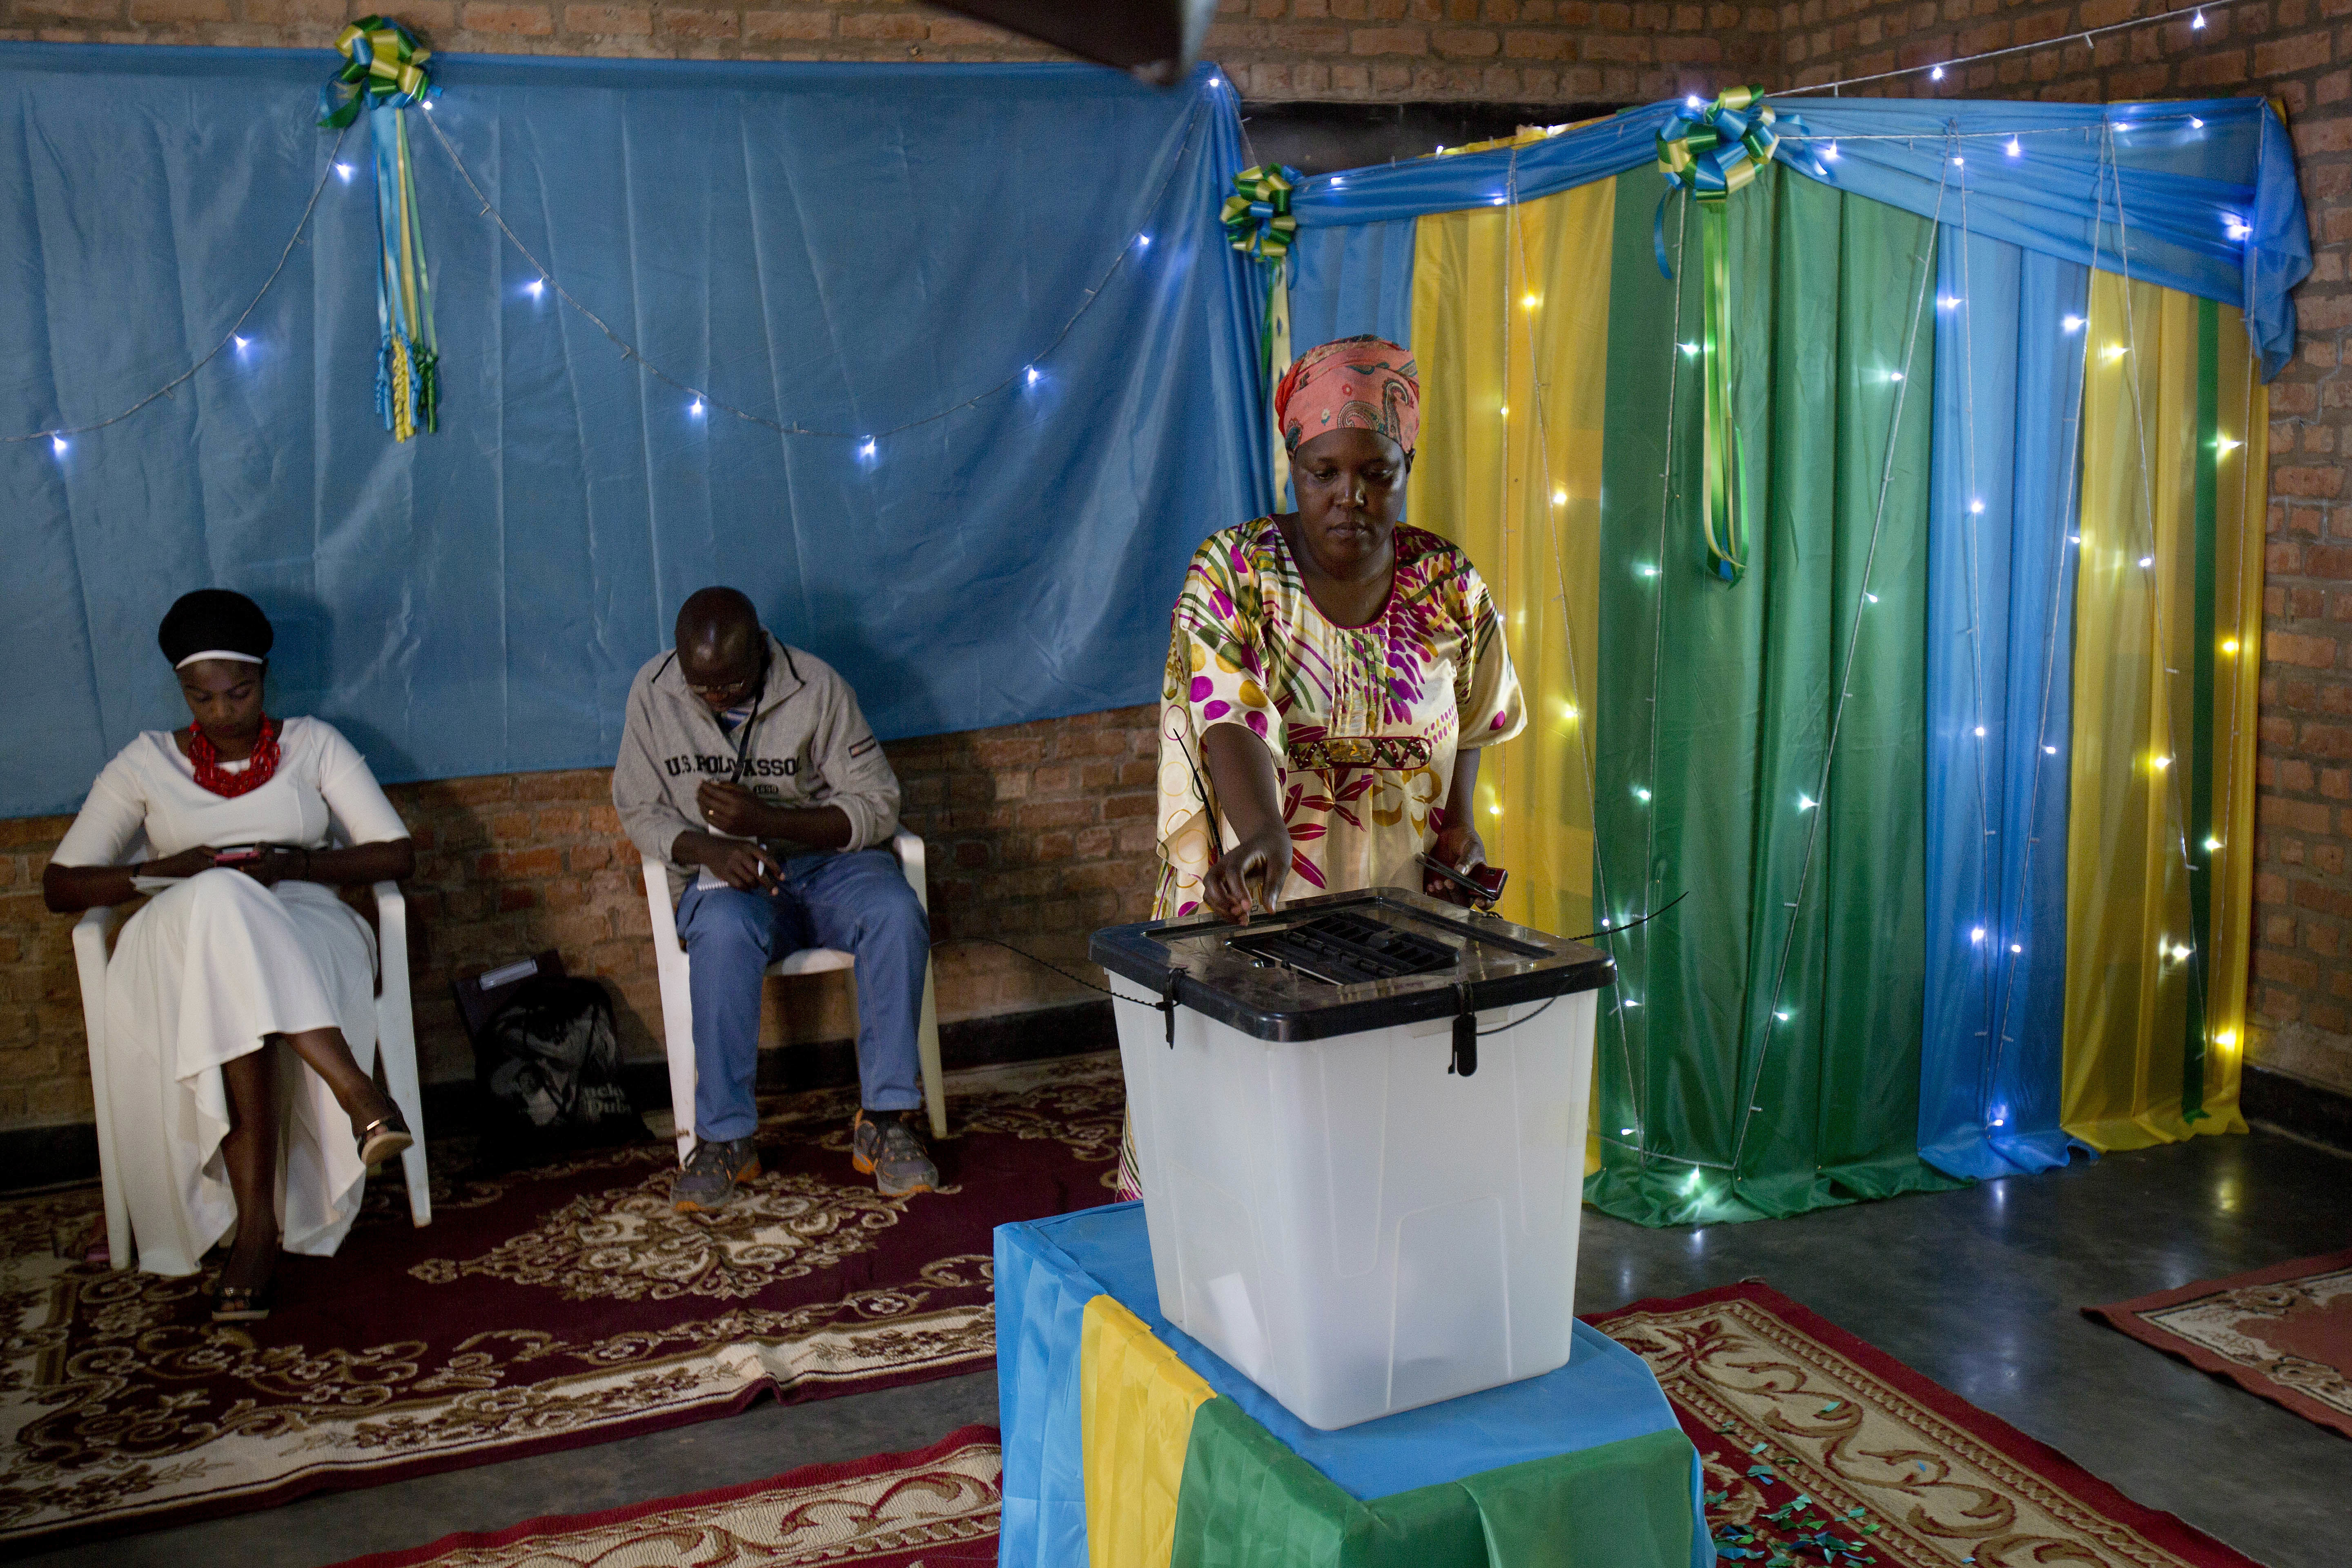 Rwandans start to vote  for the presidential elections at a polling station in Rwanda's capital Kigali Friday, Aug. 4, 2017. Outgoing President Paul Kagame is widely expected to win another term after the government disqualified all but three candidates. (AP Photo/Jerome Delay)